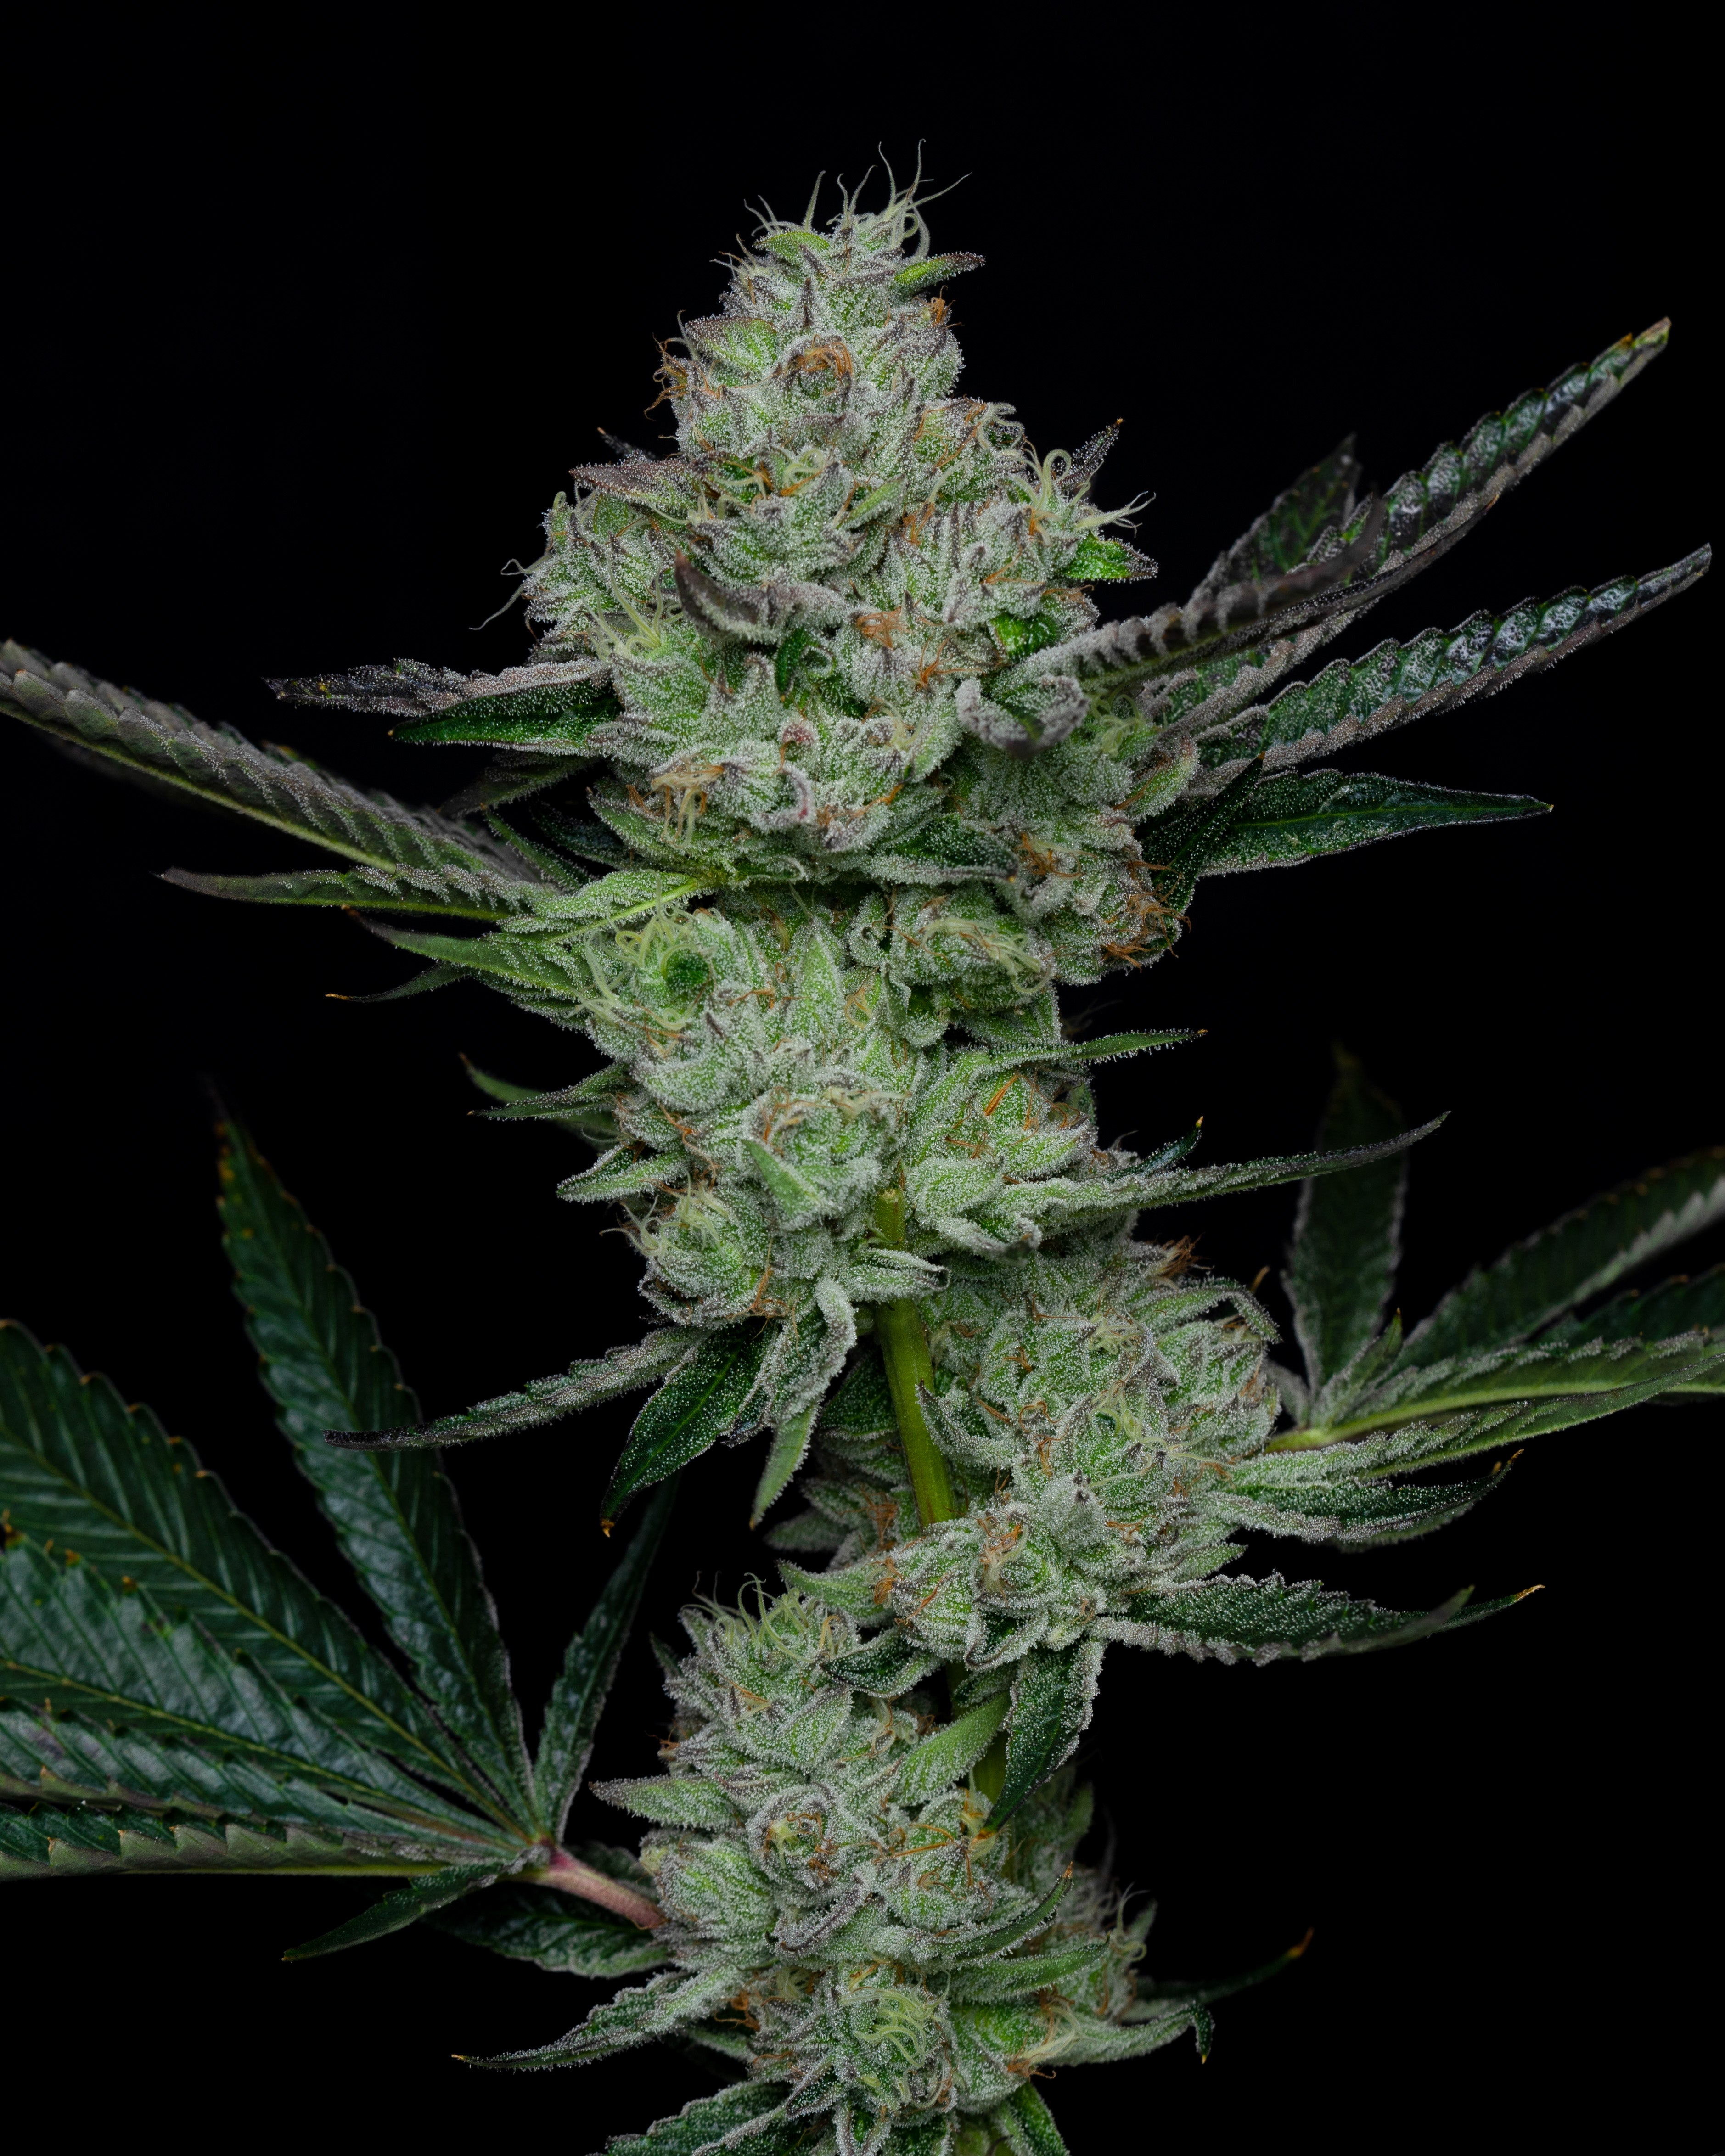 Cannabis flower buds from a quality strain of weed are high in potency, aroma, and flavor.